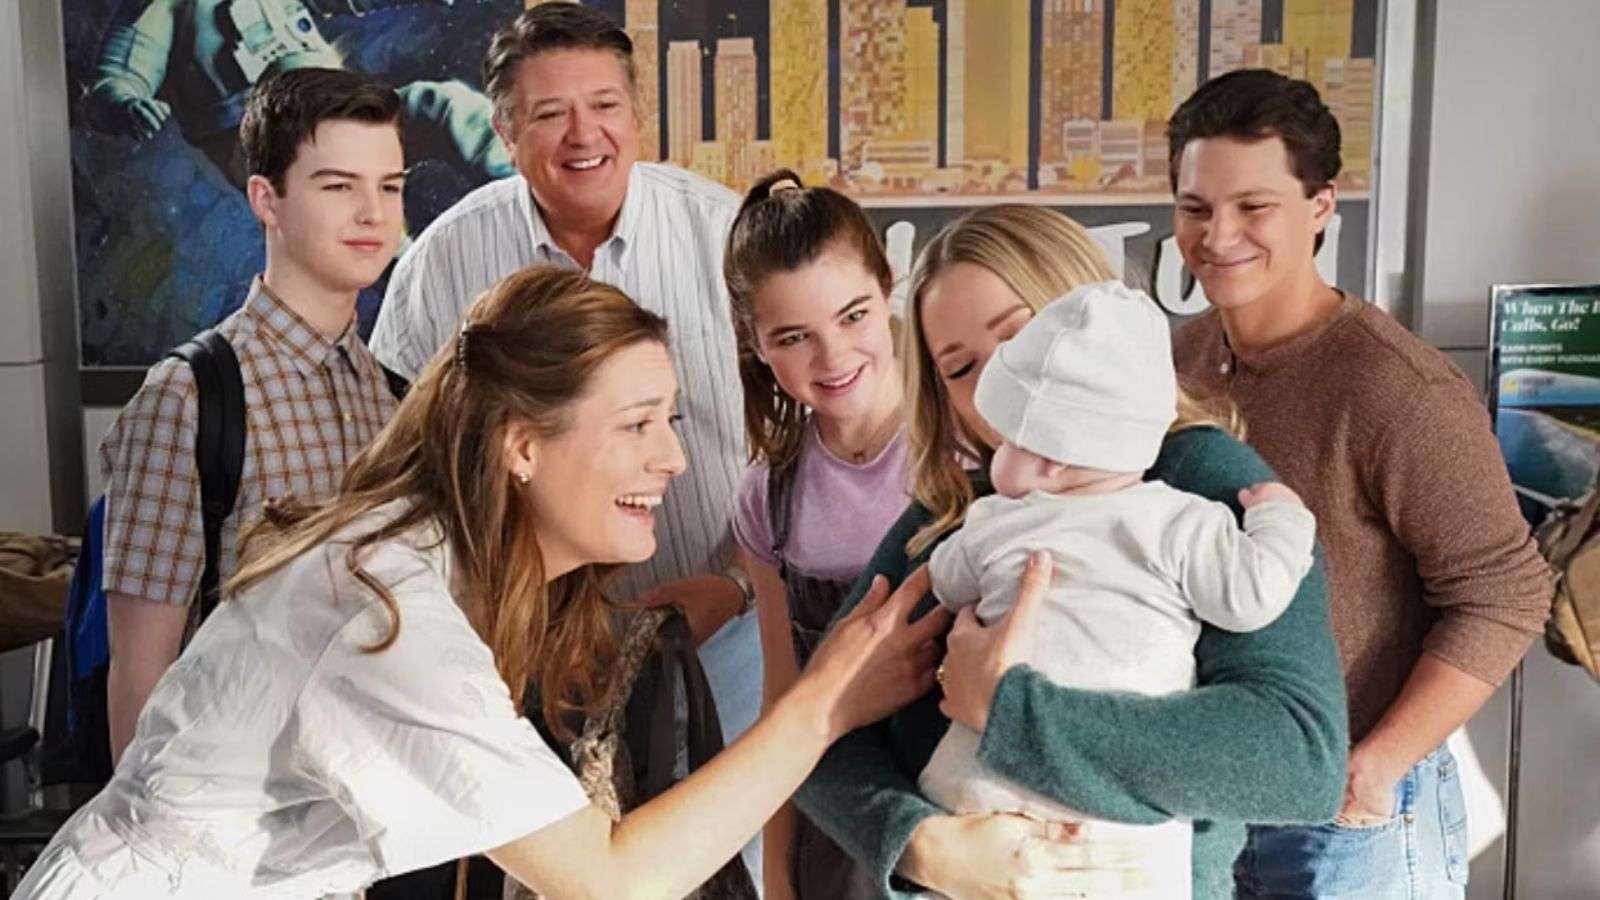 The Young Sheldon cast with baby CeCe